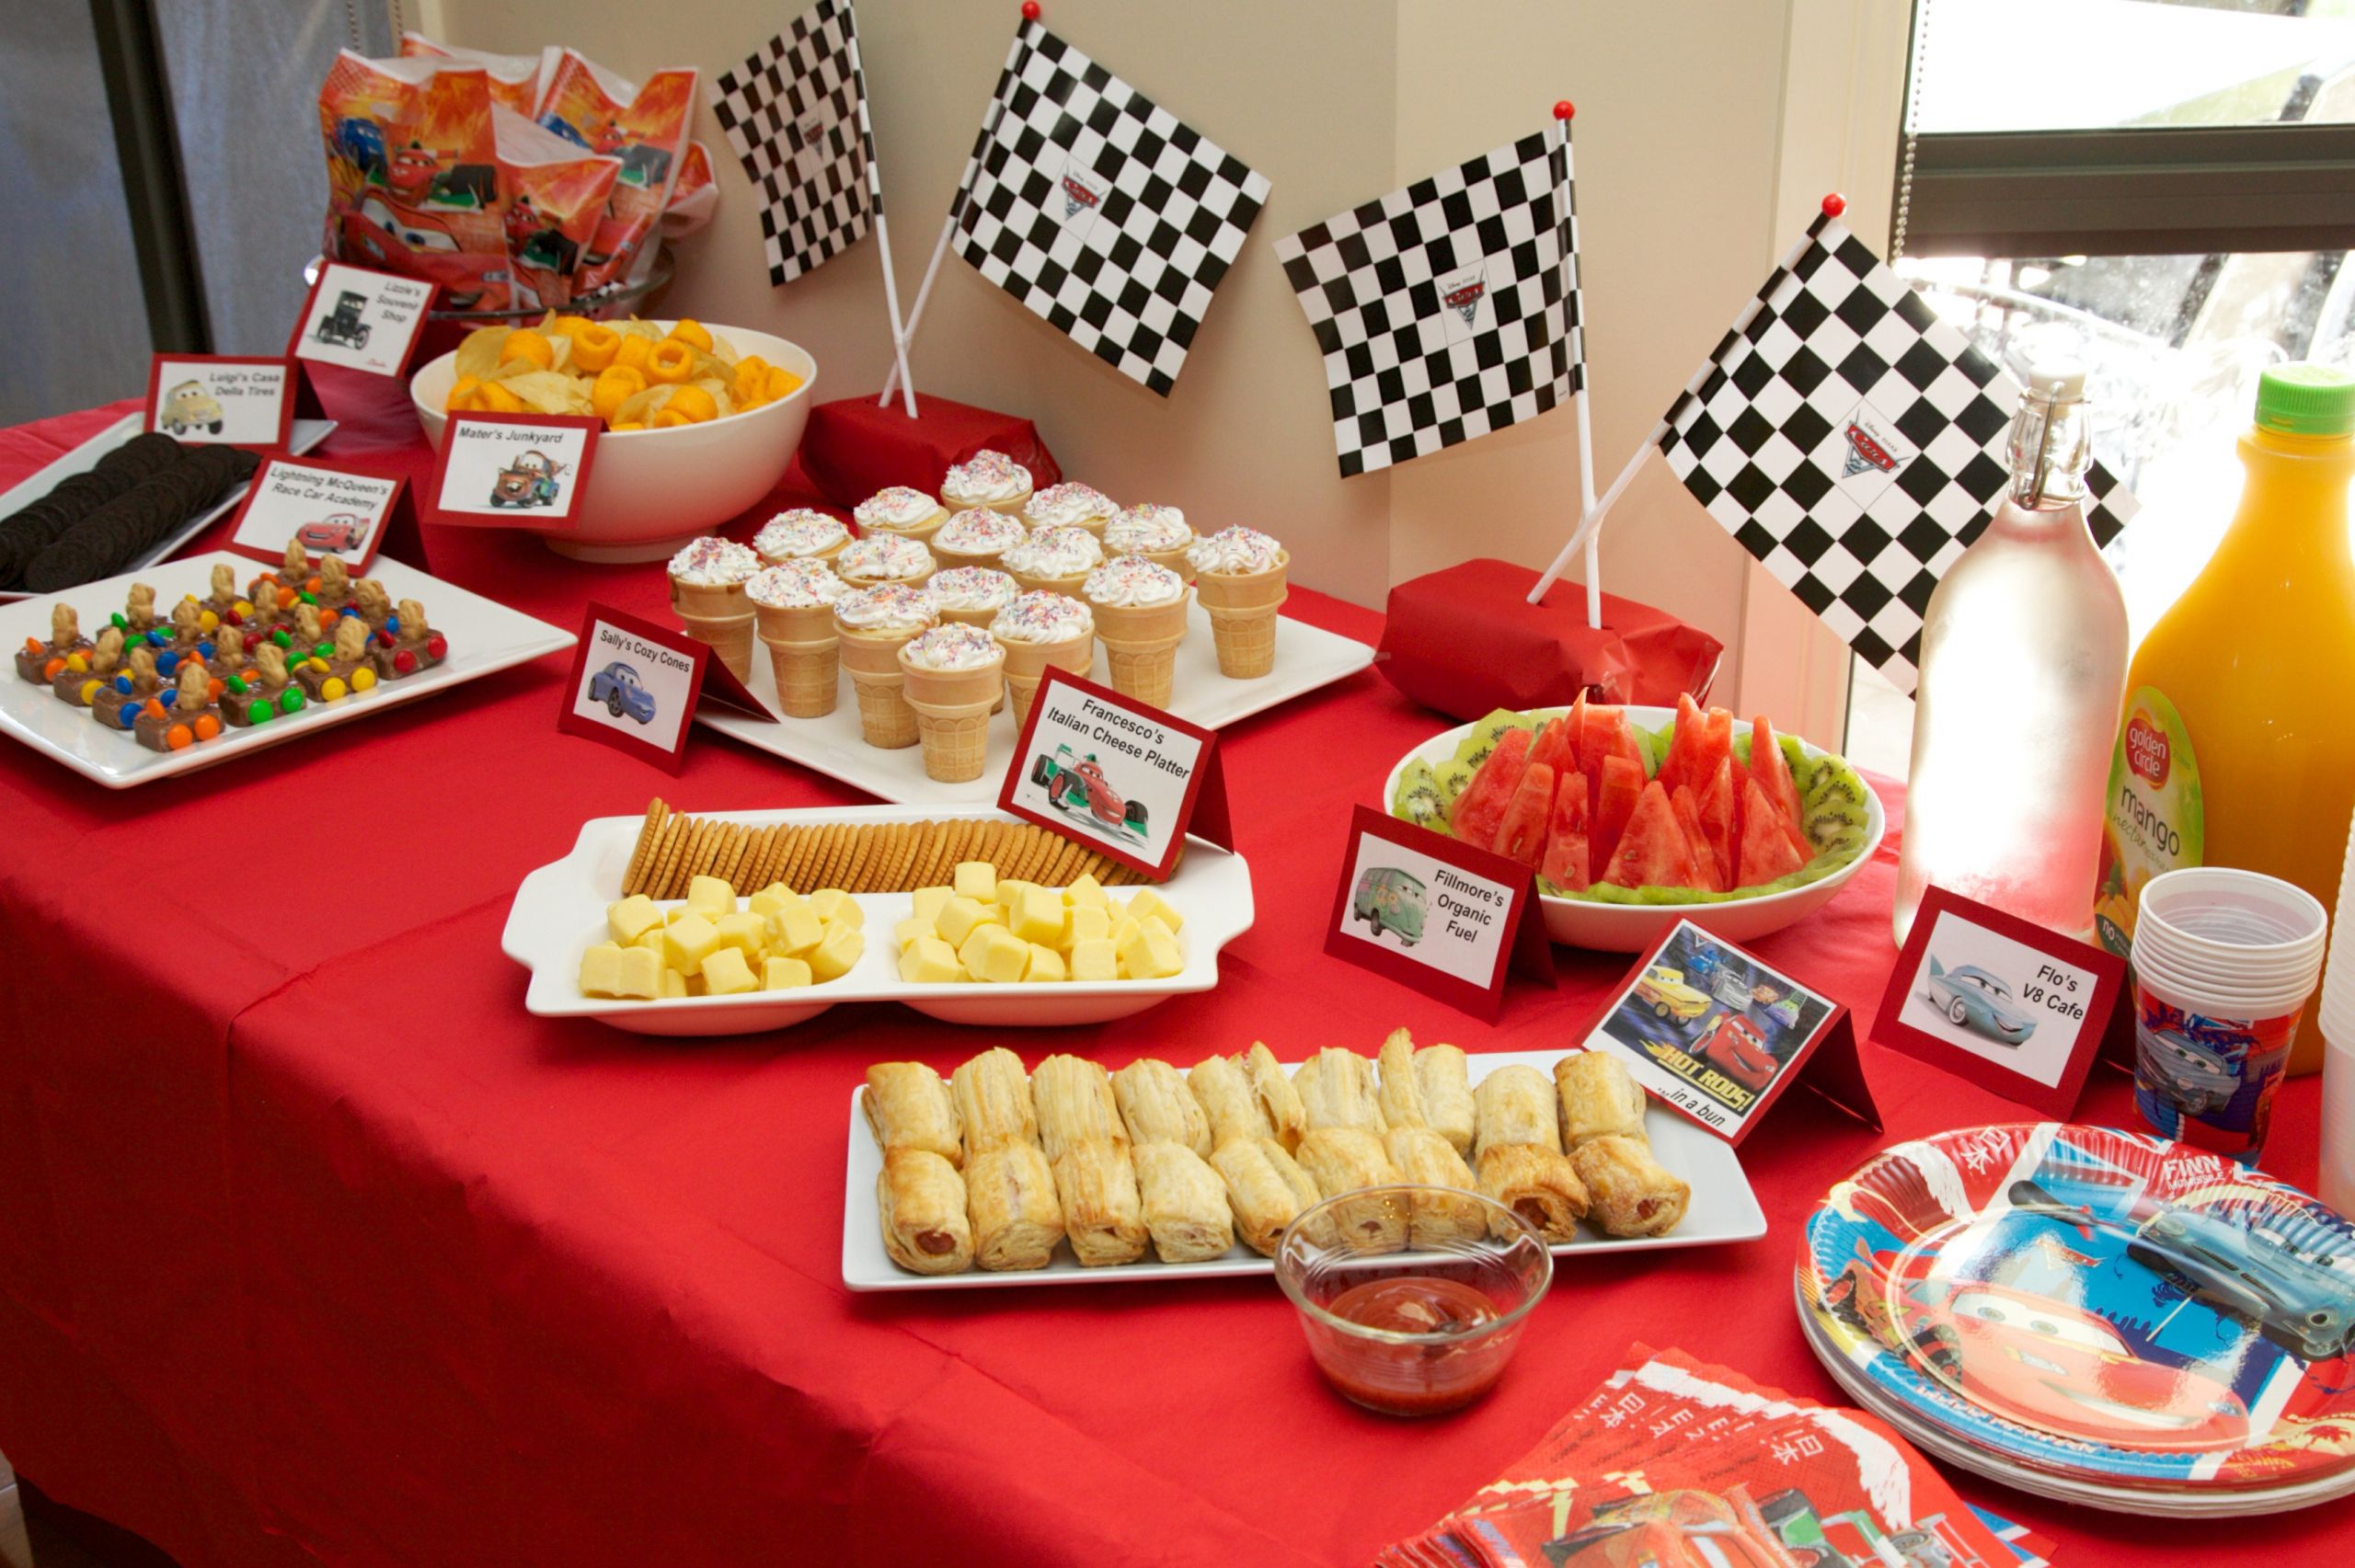 Birthday Party Food Ideas
 How to throw a BIG kids birthday party on a small bud